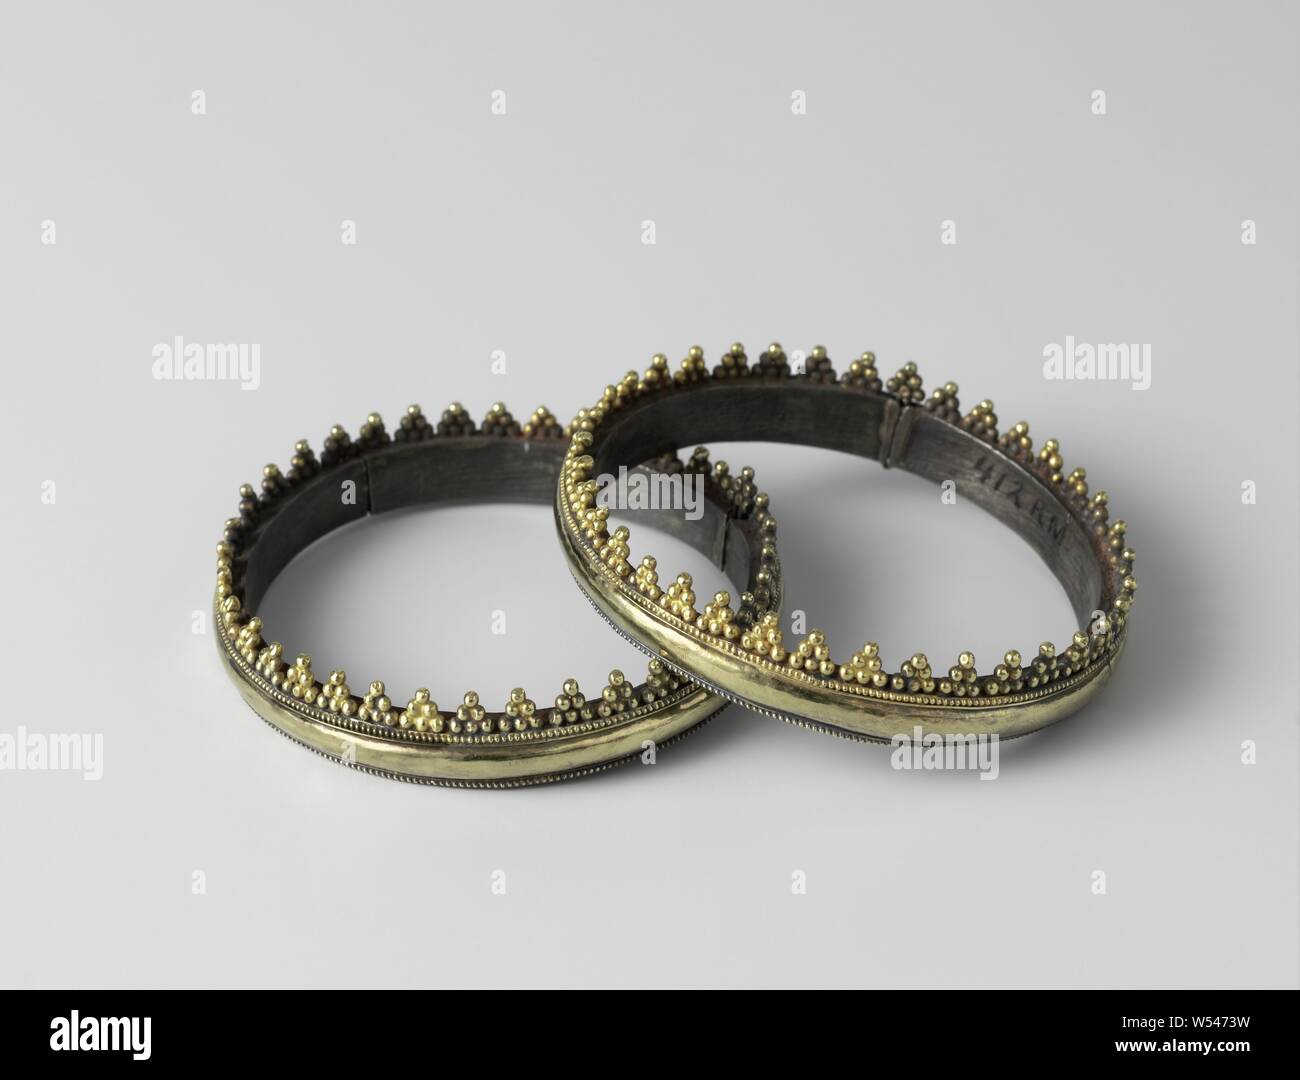 Pair of bracelets (churi), Bracelet with hinge and lock, silver with gold clad. Decorated with small battlements made up of six small balls, one tilt serves as a lock. Two pearl edges., anonymous, Surat, c. 1750, gold (metal), silver (metal), forging, d 8 cm × h 1.8 cm Stock Photo